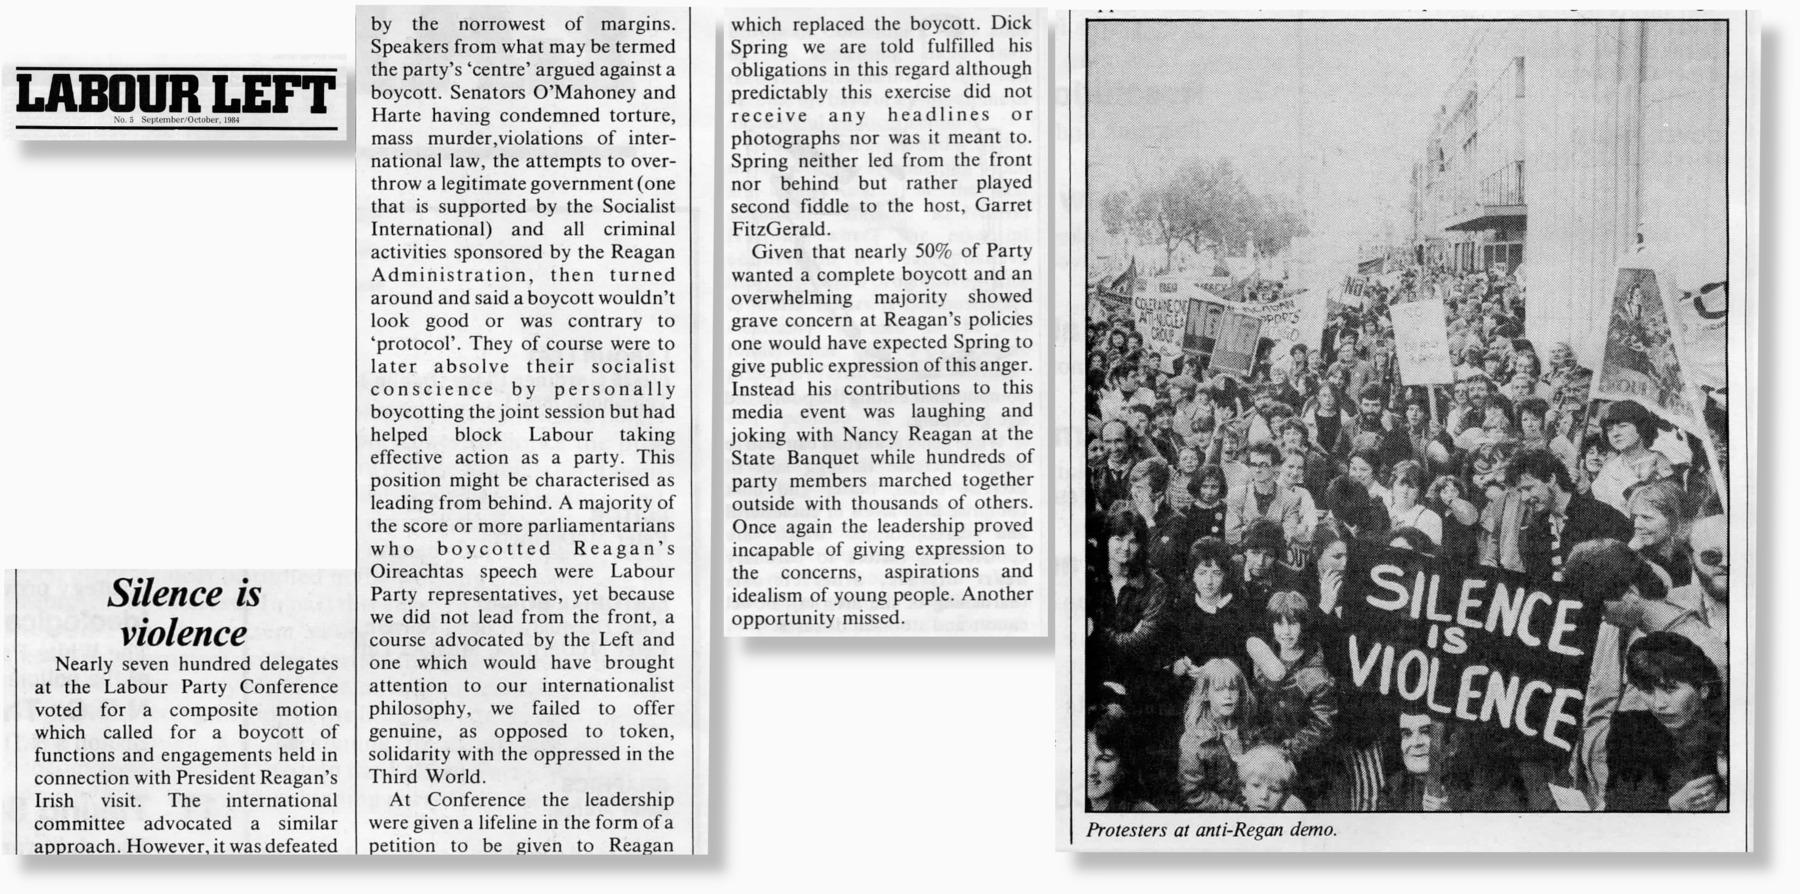 A scanned magazine article, reading:

Silence is violence

Nearly seven hundred delegates at the Labour Party Conference voted for a composite motion which called for a boycott of functions and engagements held in connection with President Reagan’s Irish visit. The international committee advocated a similar approach. However, it was defeated by the narrowest of margins.

Speakers from what may be termed the party’s ‘centre’ argued against a boycott. Senators O’Mahoney and Harte having condemned torture, mass murder,violations of international law, the attempts to overthrow a legitimate government (one that is supported by the Socialist International) and all criminal activities sponsored by the Reagan Administration, then turned around and said a boycott wouldn’t look good or was contrary to ‘protocol’. They of course were to later absolve their socialist conscience by personally boycotting the joint session but had helped block Labour taking effective action as a party. This position might be characterised as leading from behind. A majority of the score or more parliamentarians who boycotted Reagan’s Oireachtas speech were Labour Party representatives, yet because we did not lead from the front, a course advocated by the Left and one which would have brought attention to our internationalist philosophy, we failed to offer genuine, as opposed to token, solidarity with the oppressed in the Third World.

At Conference the leadership were given a lifeline in the form of a petition to be given to Reagan which replaced the boycott. Dick Spring we are told fulfilled his obligations in this regard although predictably this exercise did not receive any headlines or photographs nor was it meant to. Spring neither led from the front nor behind but rather played second fiddle to the host, Garret FitzGerald.

Given that nearly 50% of Party wanted a complete boycott and an overwhelming majority showed grave concern at Reagan’s policies one would have expected Spring to give public expression of this anger. Instead his contributions to this media event was laughing and joking with Nancy Reagan at the State Banquet while hundreds of party members marched together outside with thousands of others.
Once again the leadership proved incapable of giving expression to the concerns, aspirations and idealism of young people. Another opportunity missed.

[Image shows a number of people marching in Dublin with the foreground banner reading "Silence is violence". It is captioned: Protestors at anti-Reagan demo.]